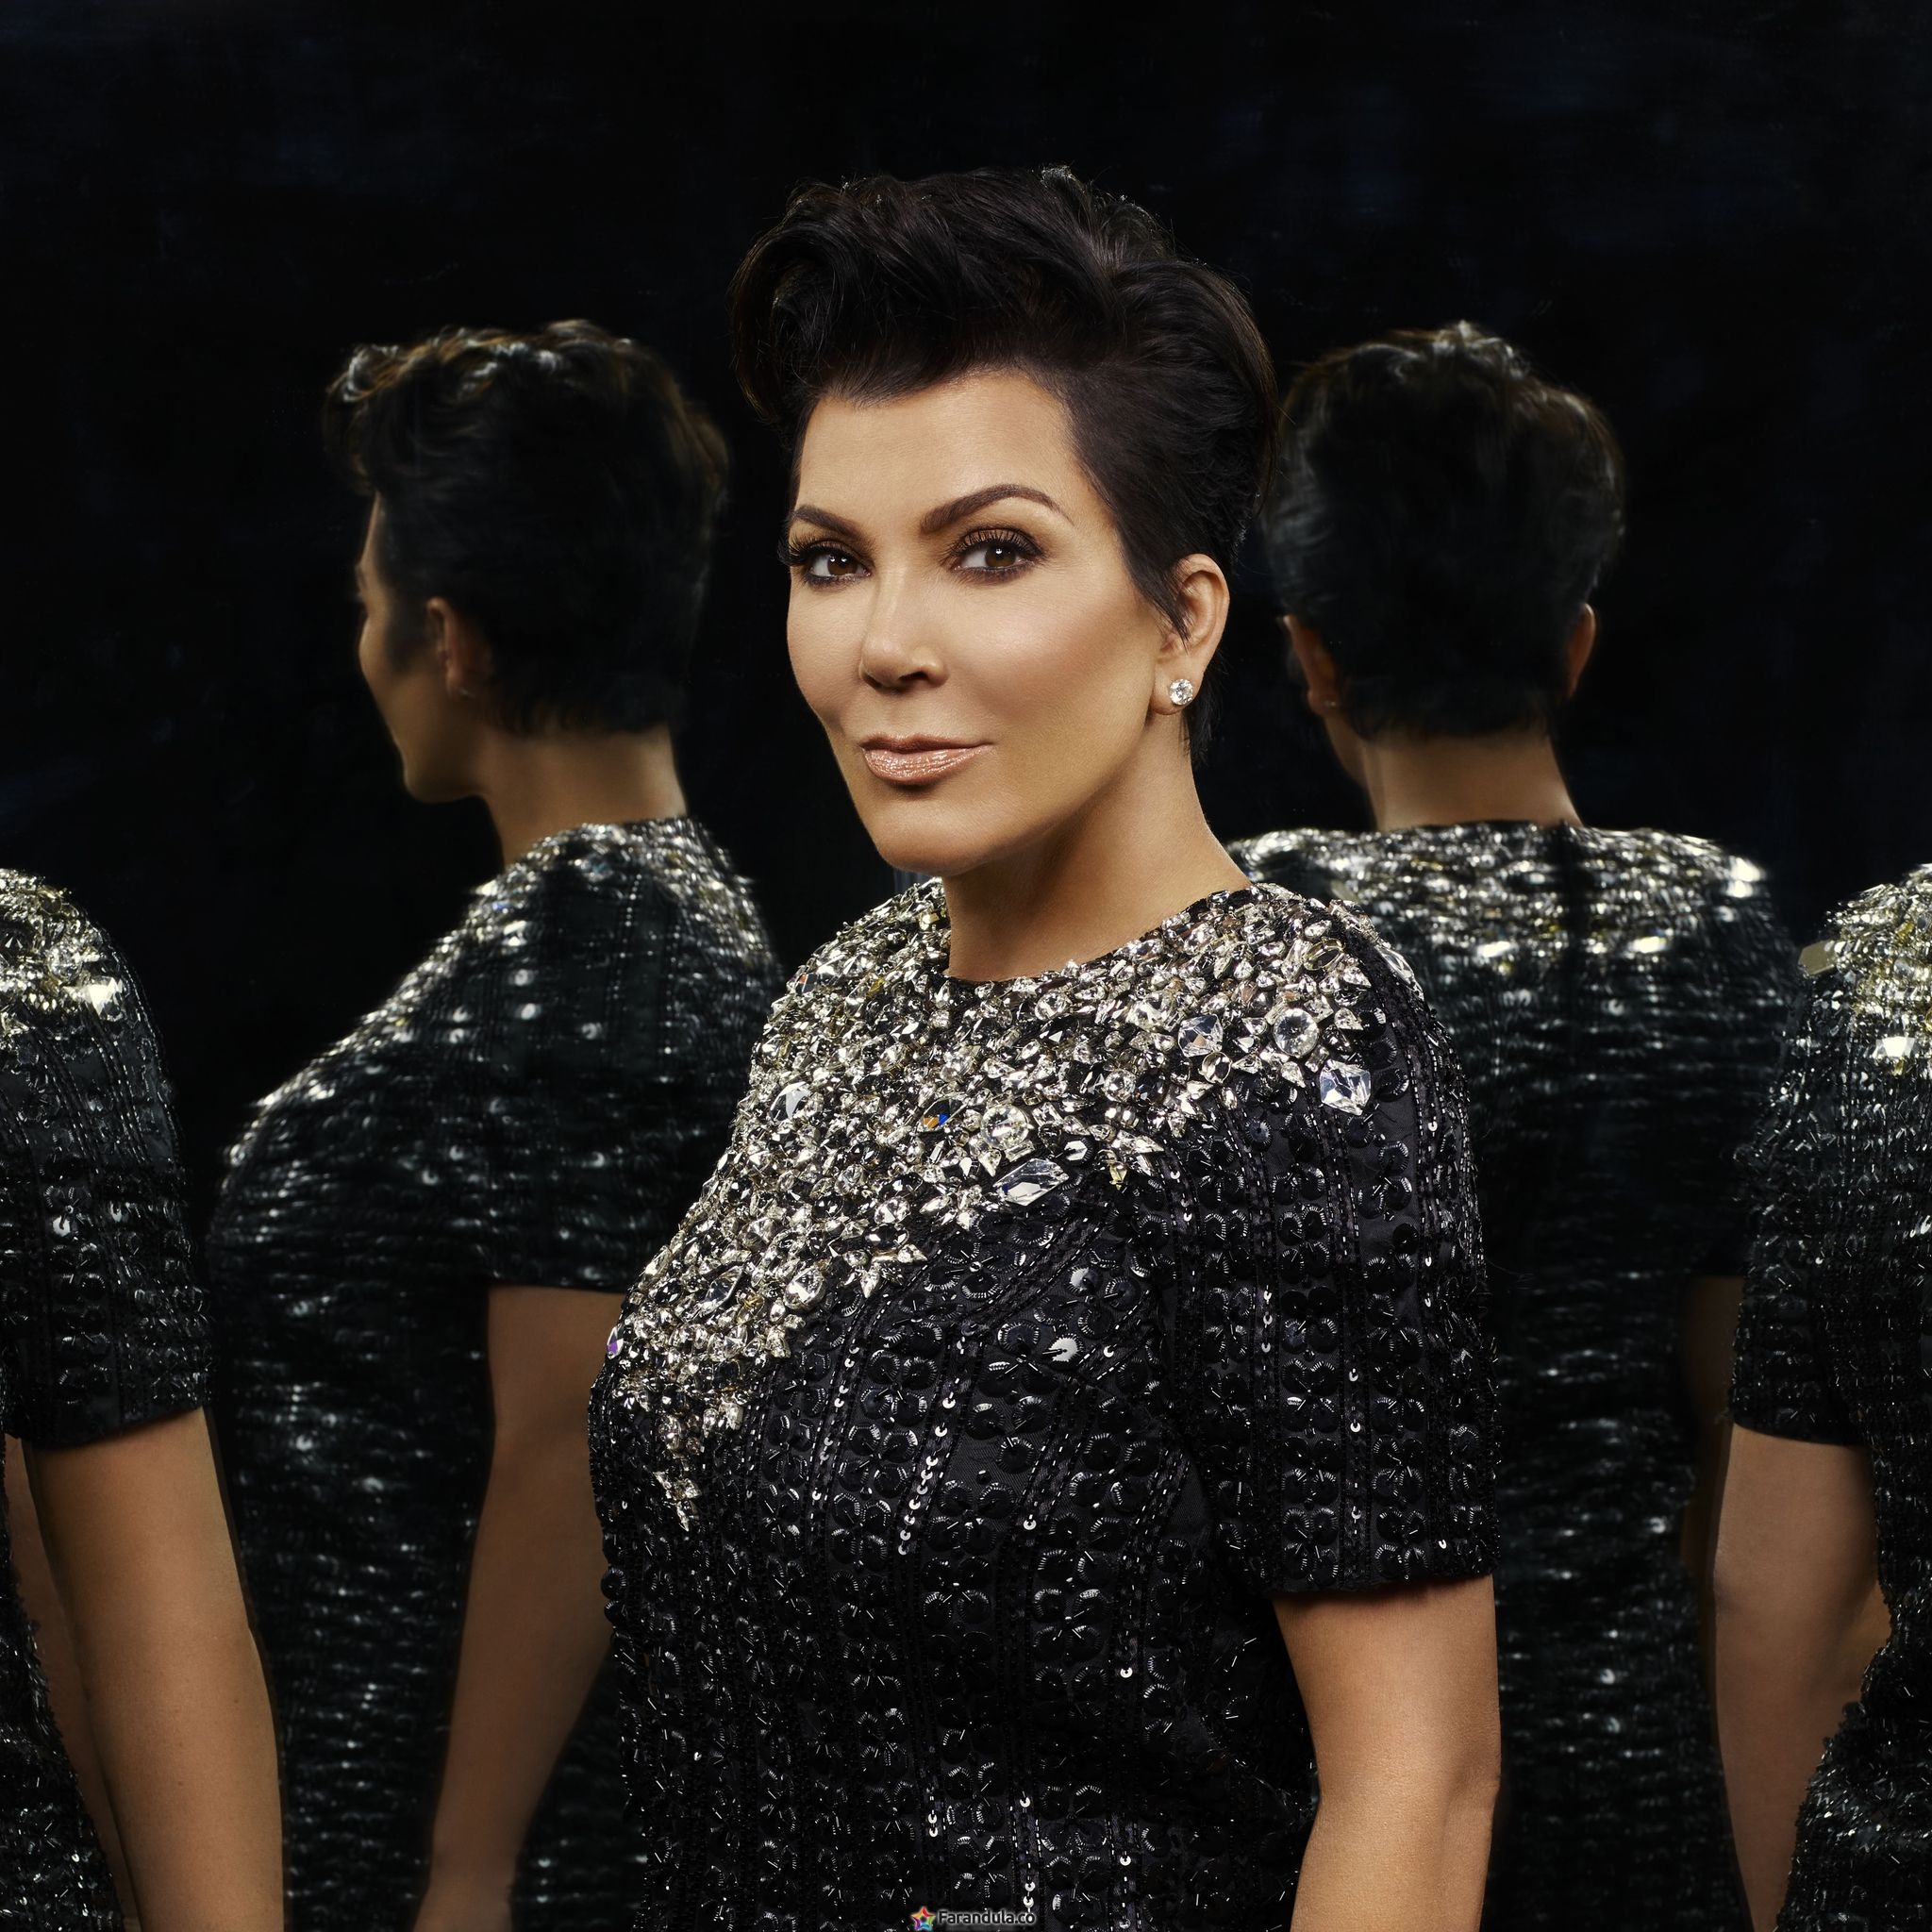 Kris Jenner Keeping Up With The Kardashians Season 14 5k iPad Air HD 4k Wallpaper, Image, Background, Photo and Picture